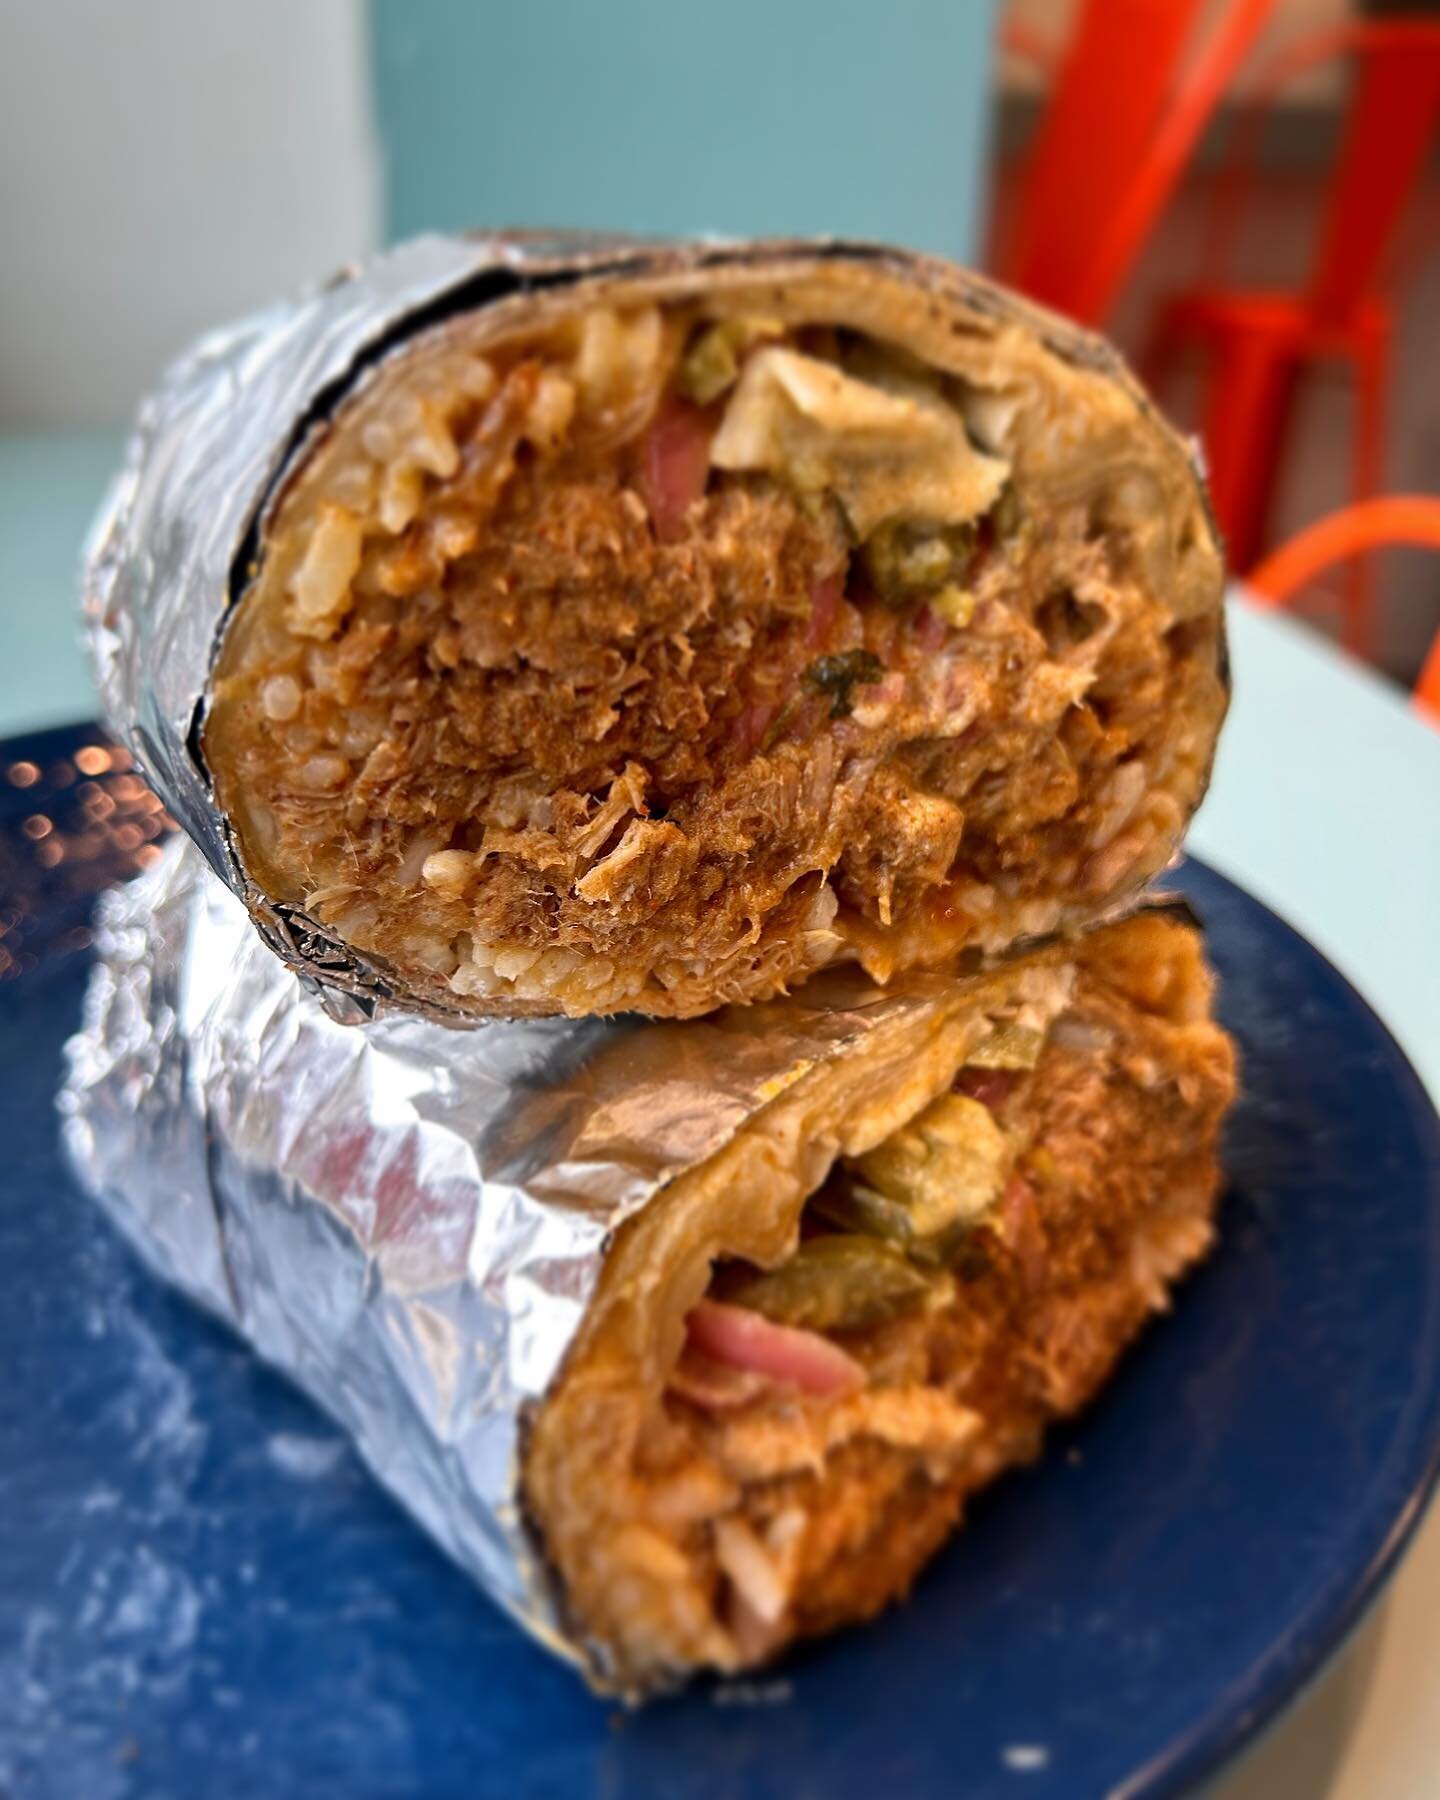 Today&rsquo;s Special 
Loaded Pulled Pork Burrito 
Rice, Beans, Pico, Crema , Cheese, Salsa
12$ 

Open from 10:30am- 5:30pm 
For large orders or catering

(817) 862-9700 📞 

#burrito #special #daily #pork #fw #fwtexas #fortworth